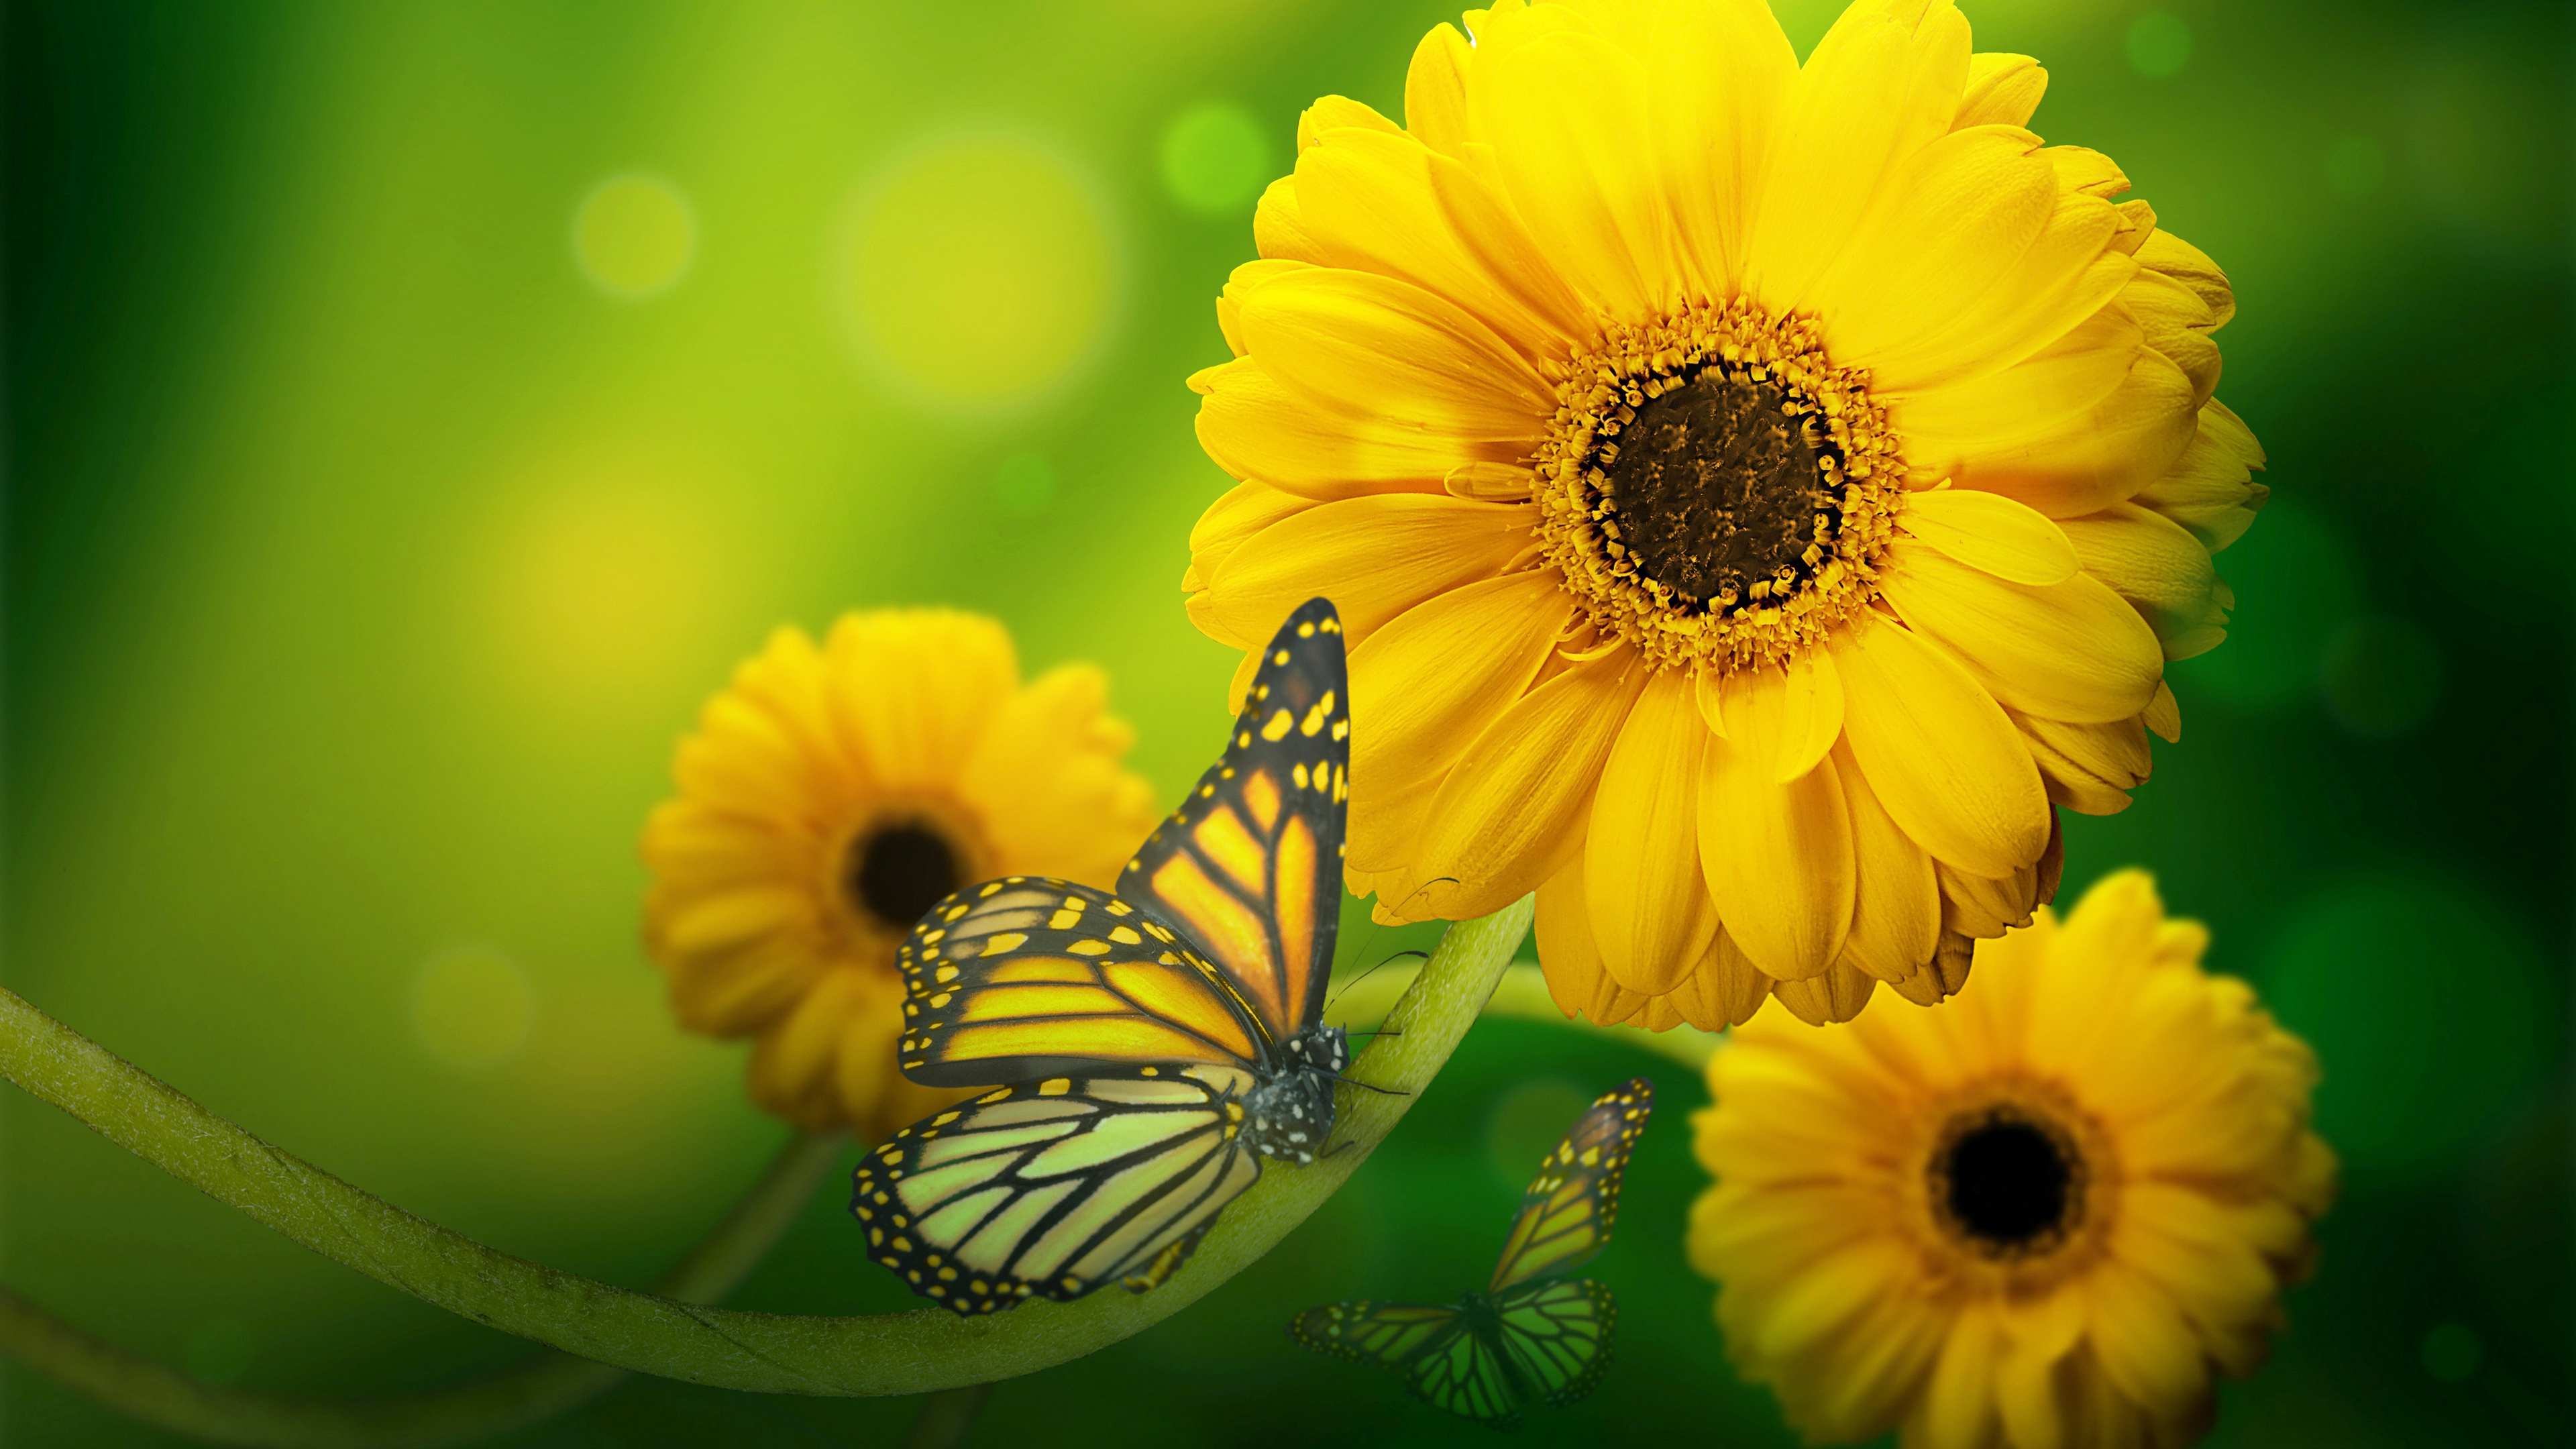 Yellow Flowers With Butterfly Wallpaper - HD Wallpaper 